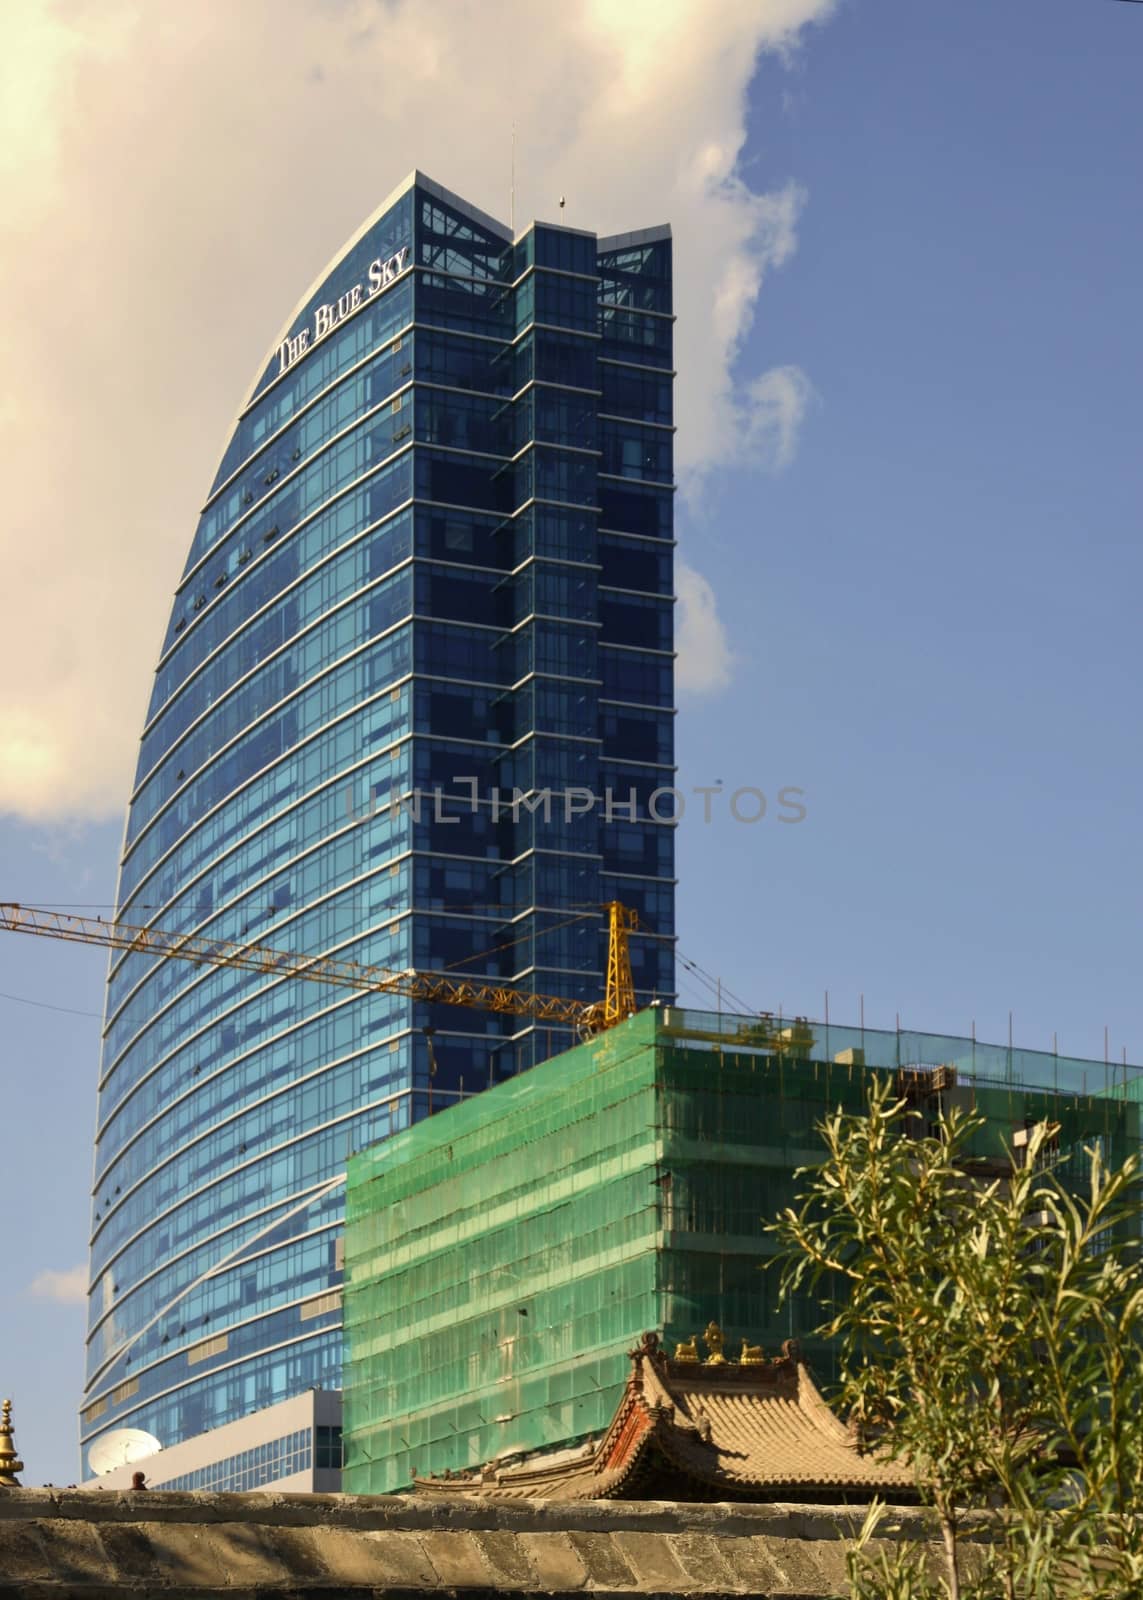 New construction of buildings in city Ulaanbaatar,Mongolia by jnerad